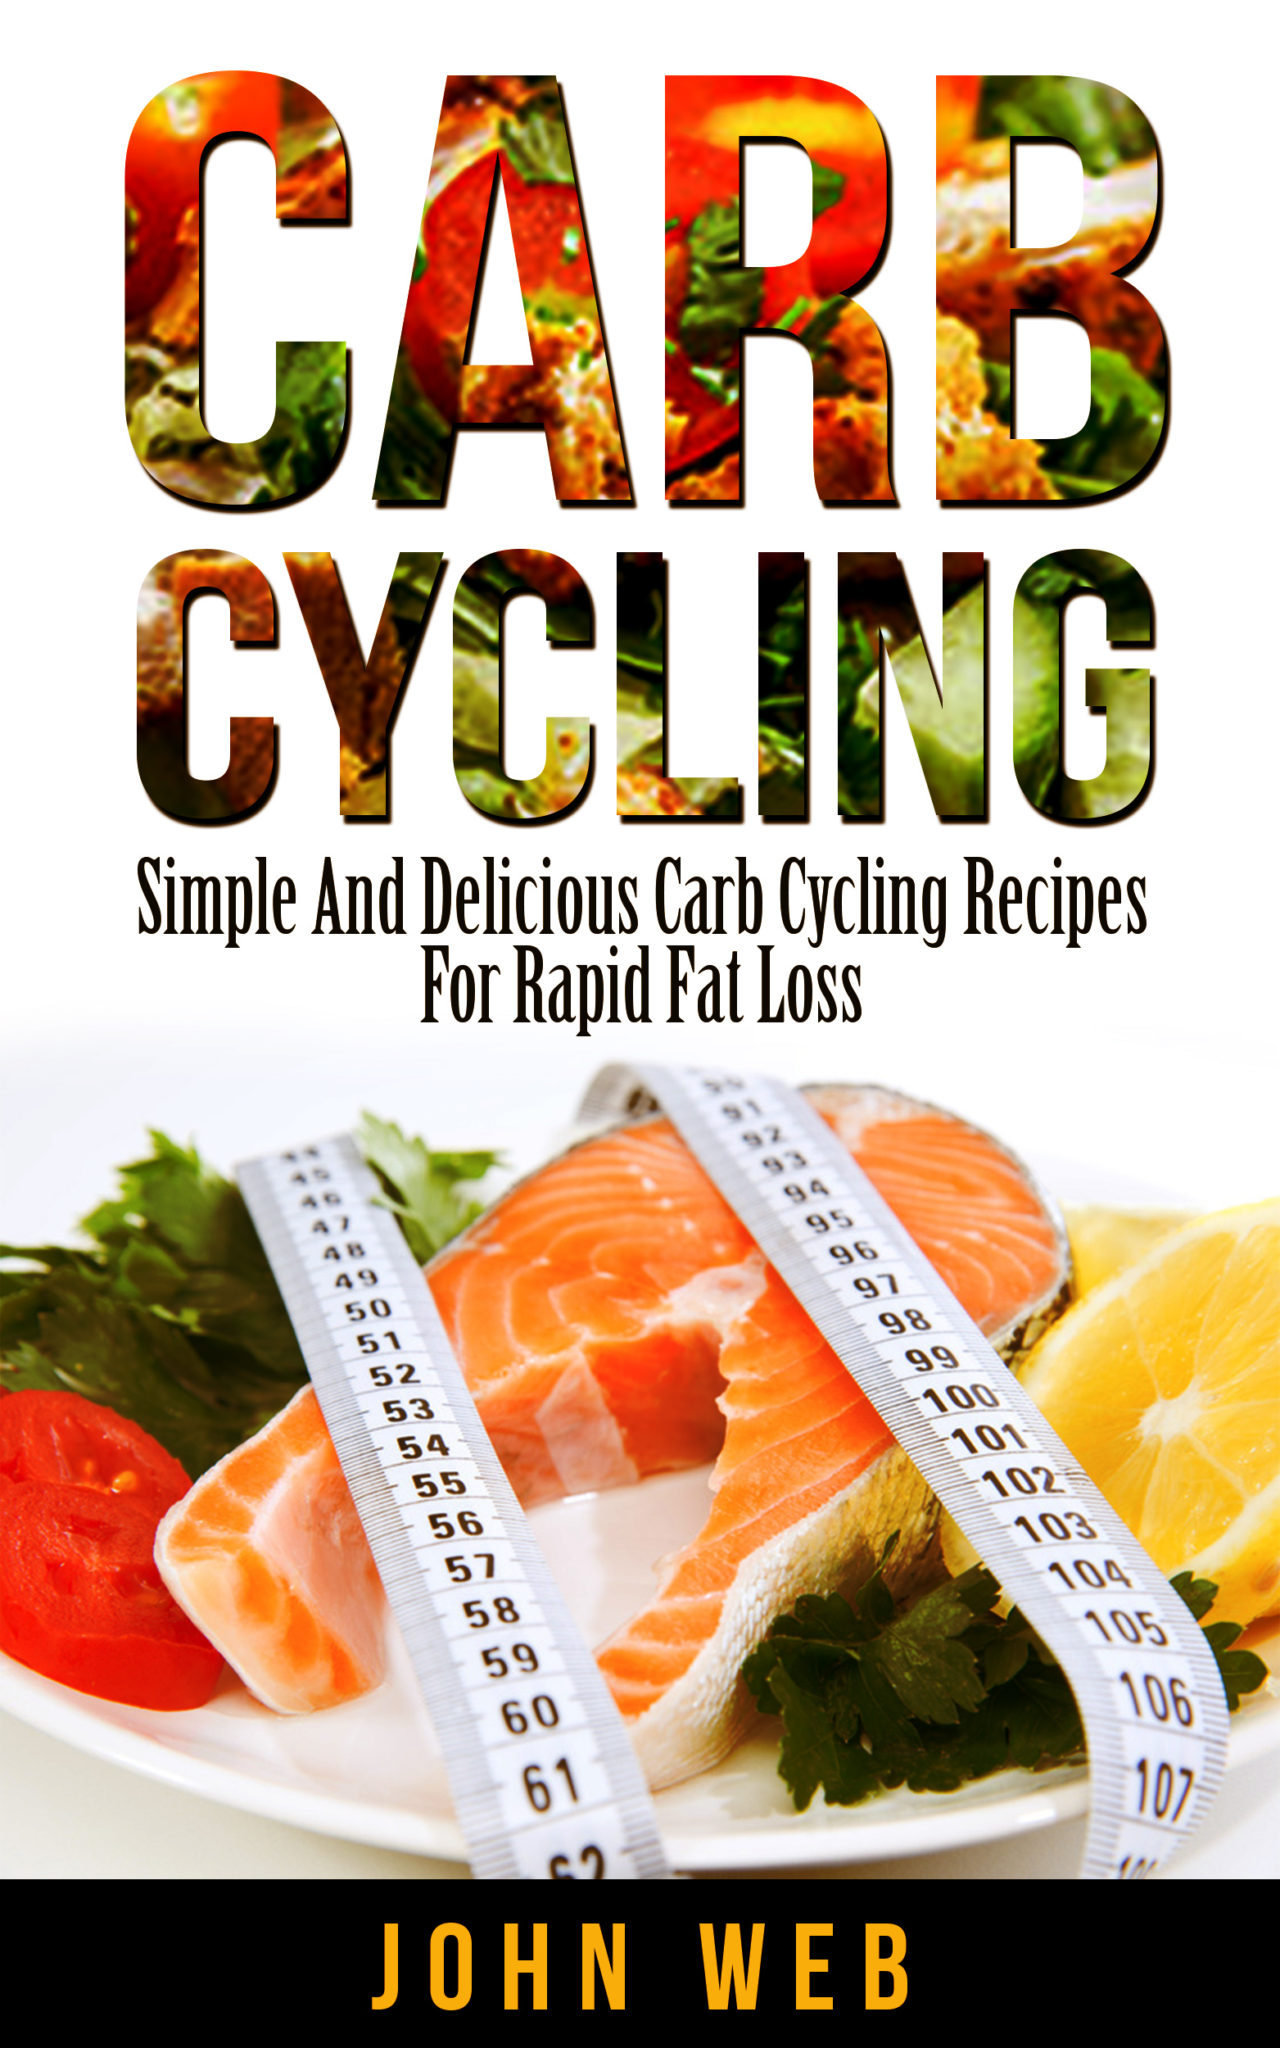 Carb Cycling – Simple And Delicious Carb Cycling Recipes For Rapid Fat Loss by John Web